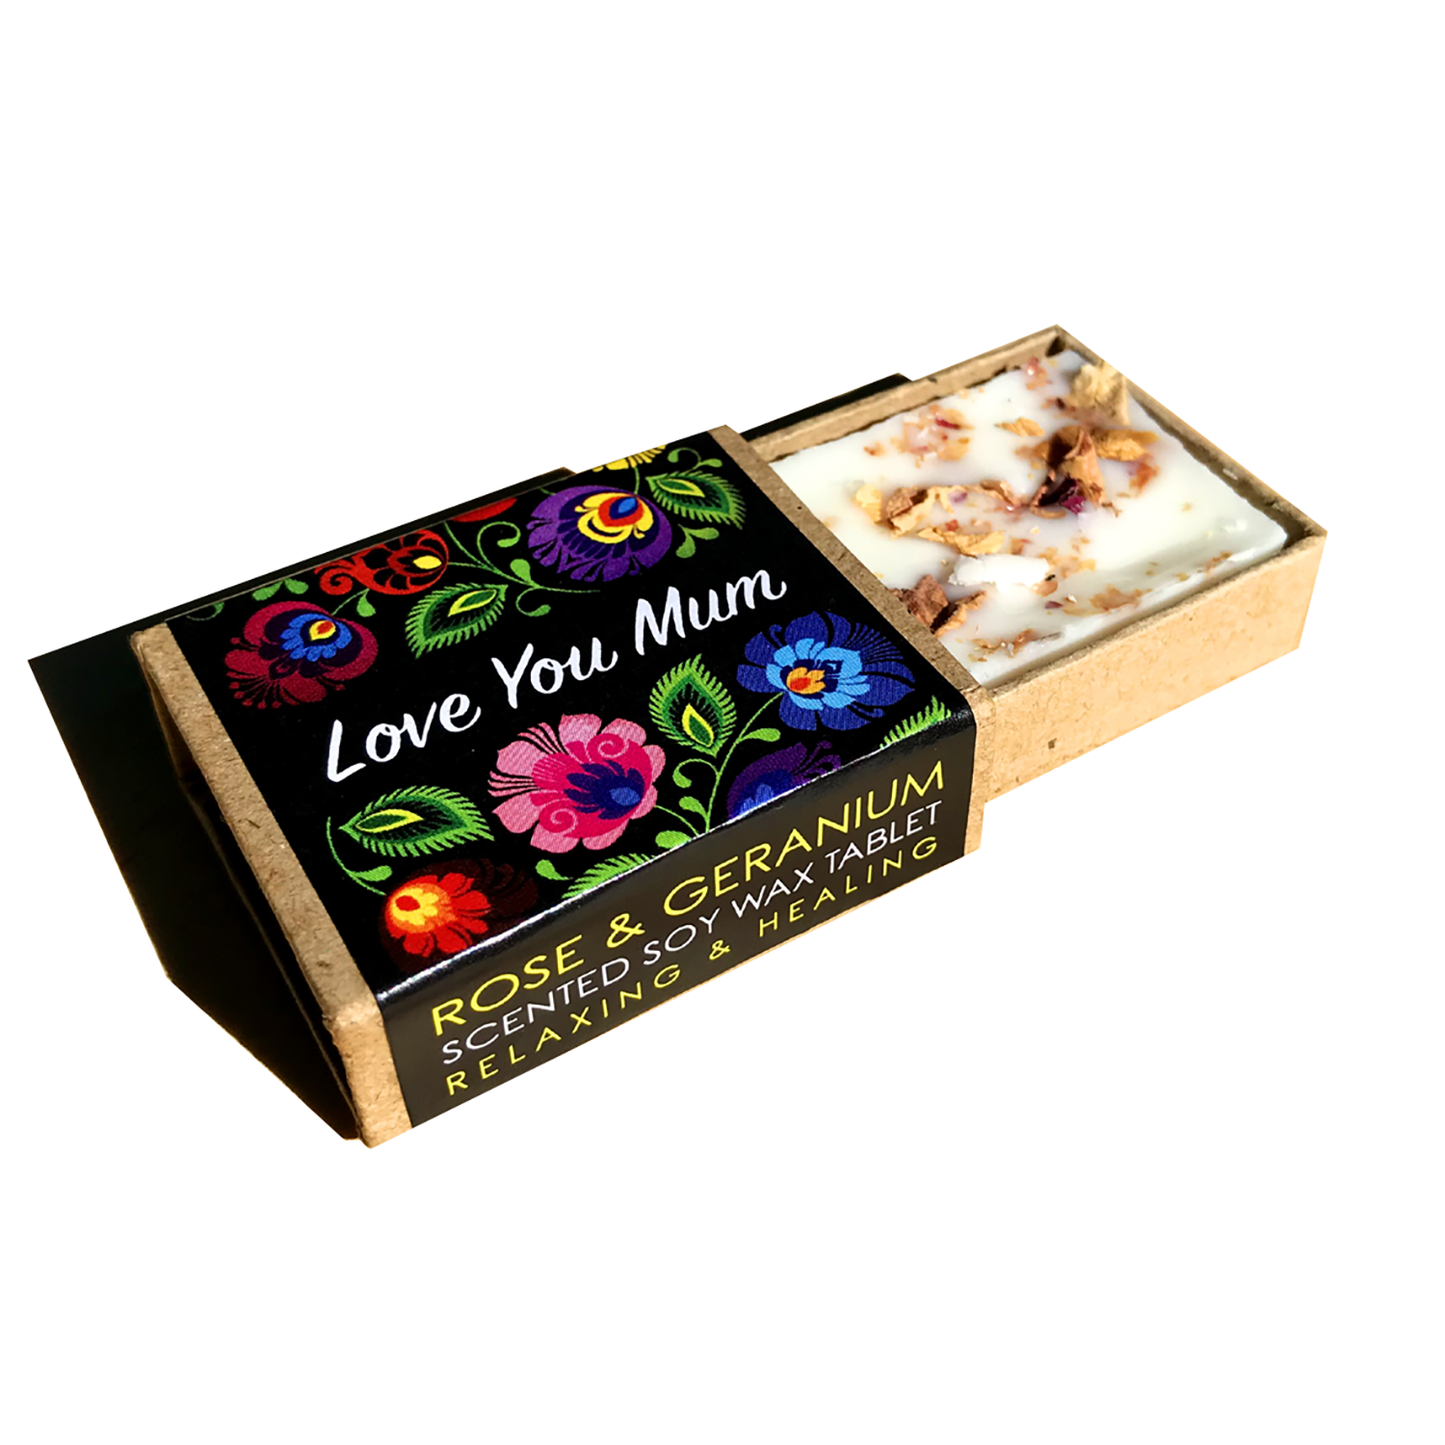 Scentibility / Scented Soy Wax Tablet & Melt / Love you Mum